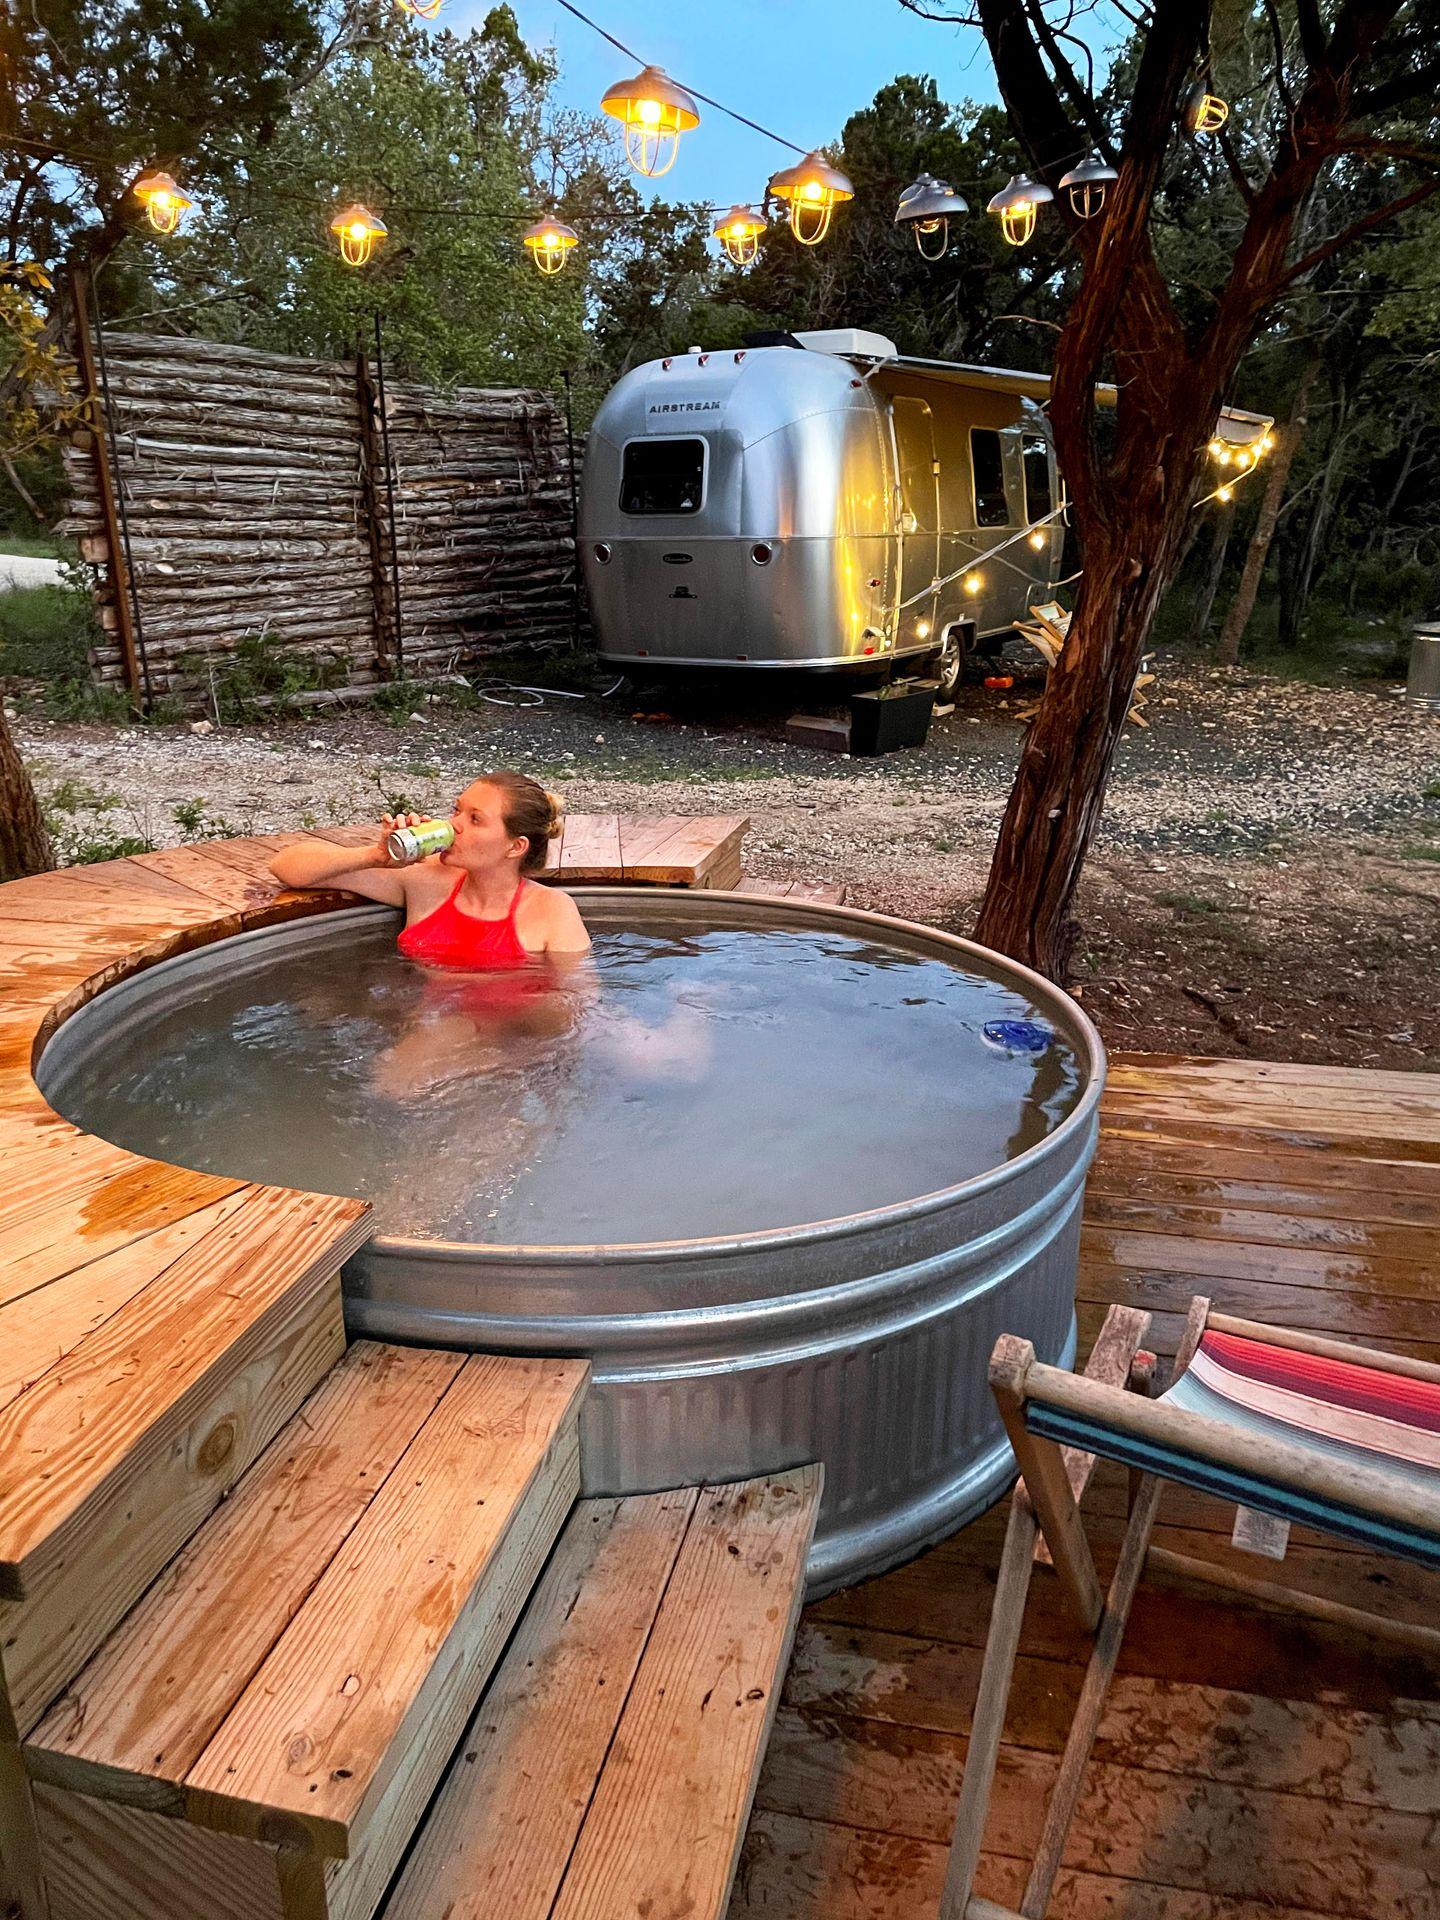 Lydia sitting in the hot tub at the Basecamp Airbnb and drinking a beer. The hot tub sits up on a wooden platform and you can see the airstream in the background.